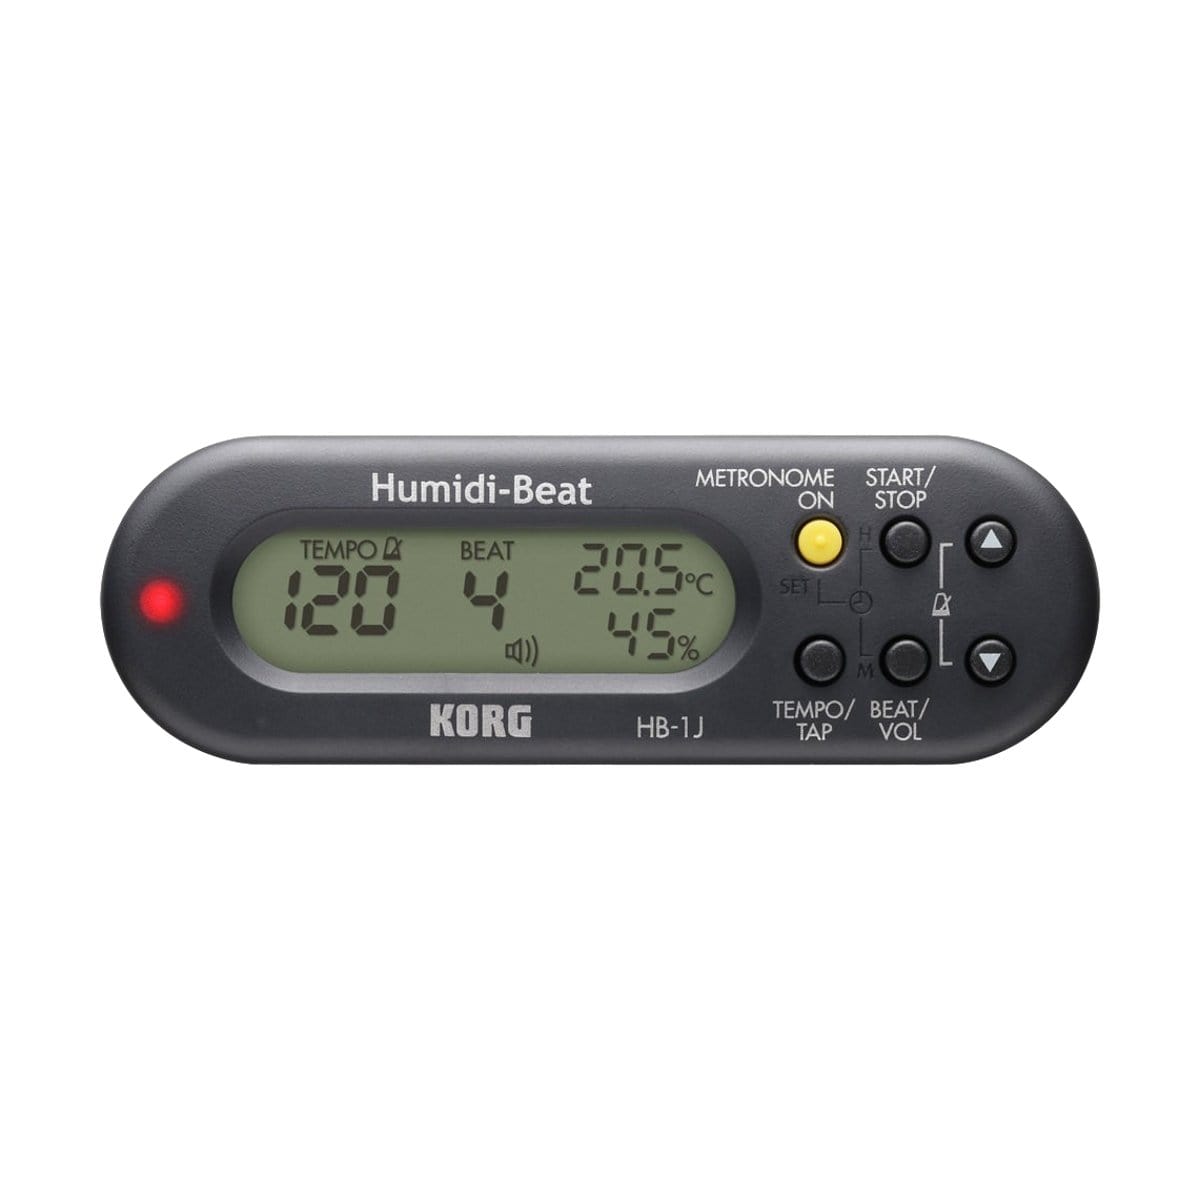 Korg Guitar Accessories Korg Humidi-Beat Metronome with Humidity and Temperature Detector HB-1-BK - Byron Music